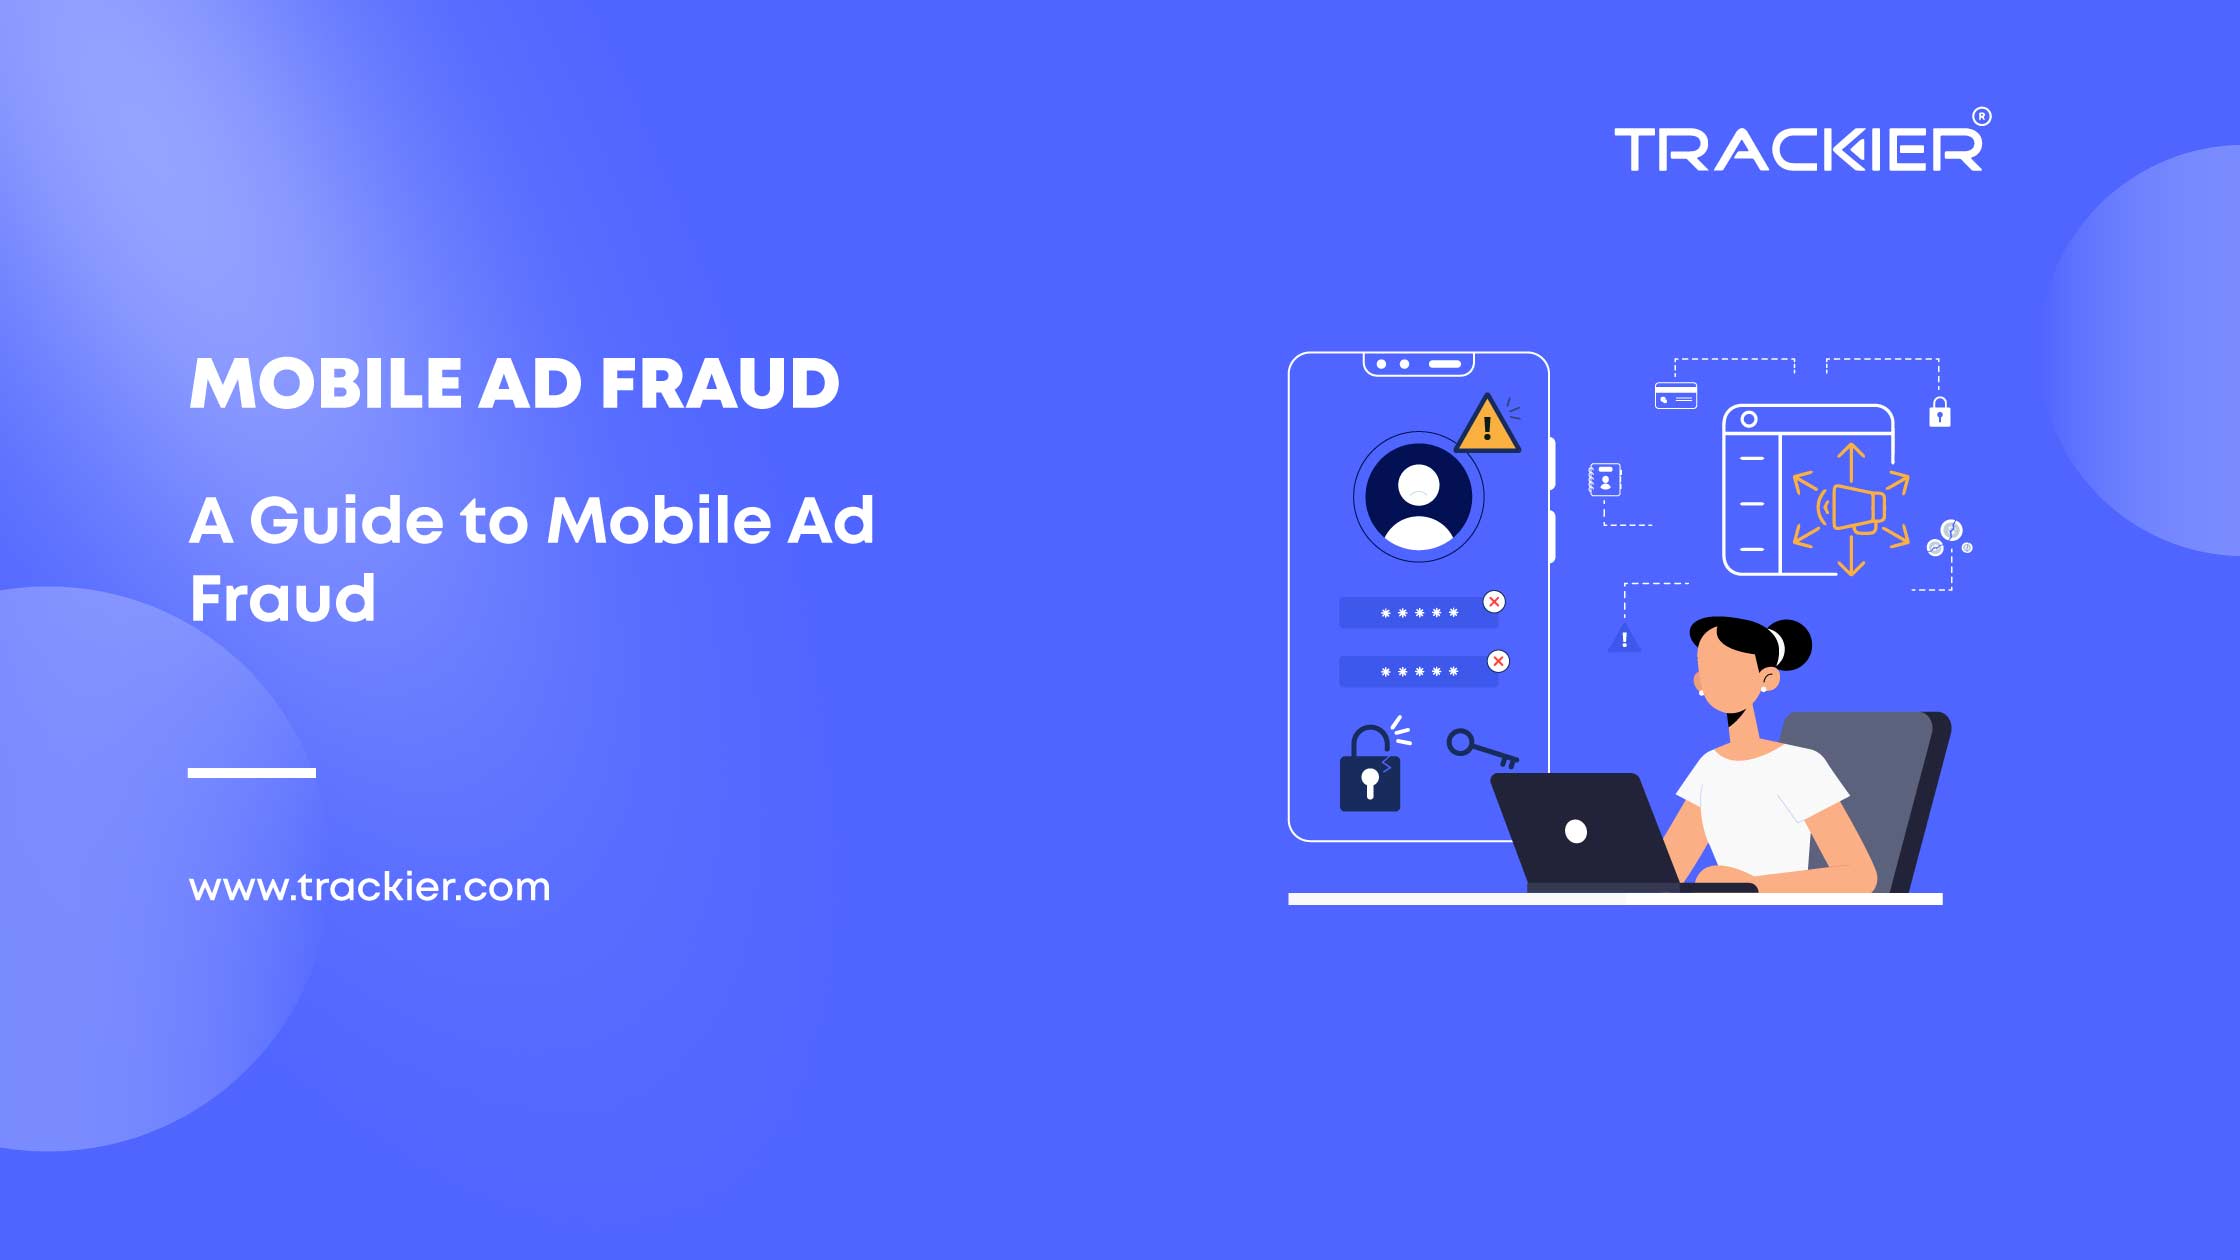 Get aware of the prevailing mobile ad fraud and prevent them.